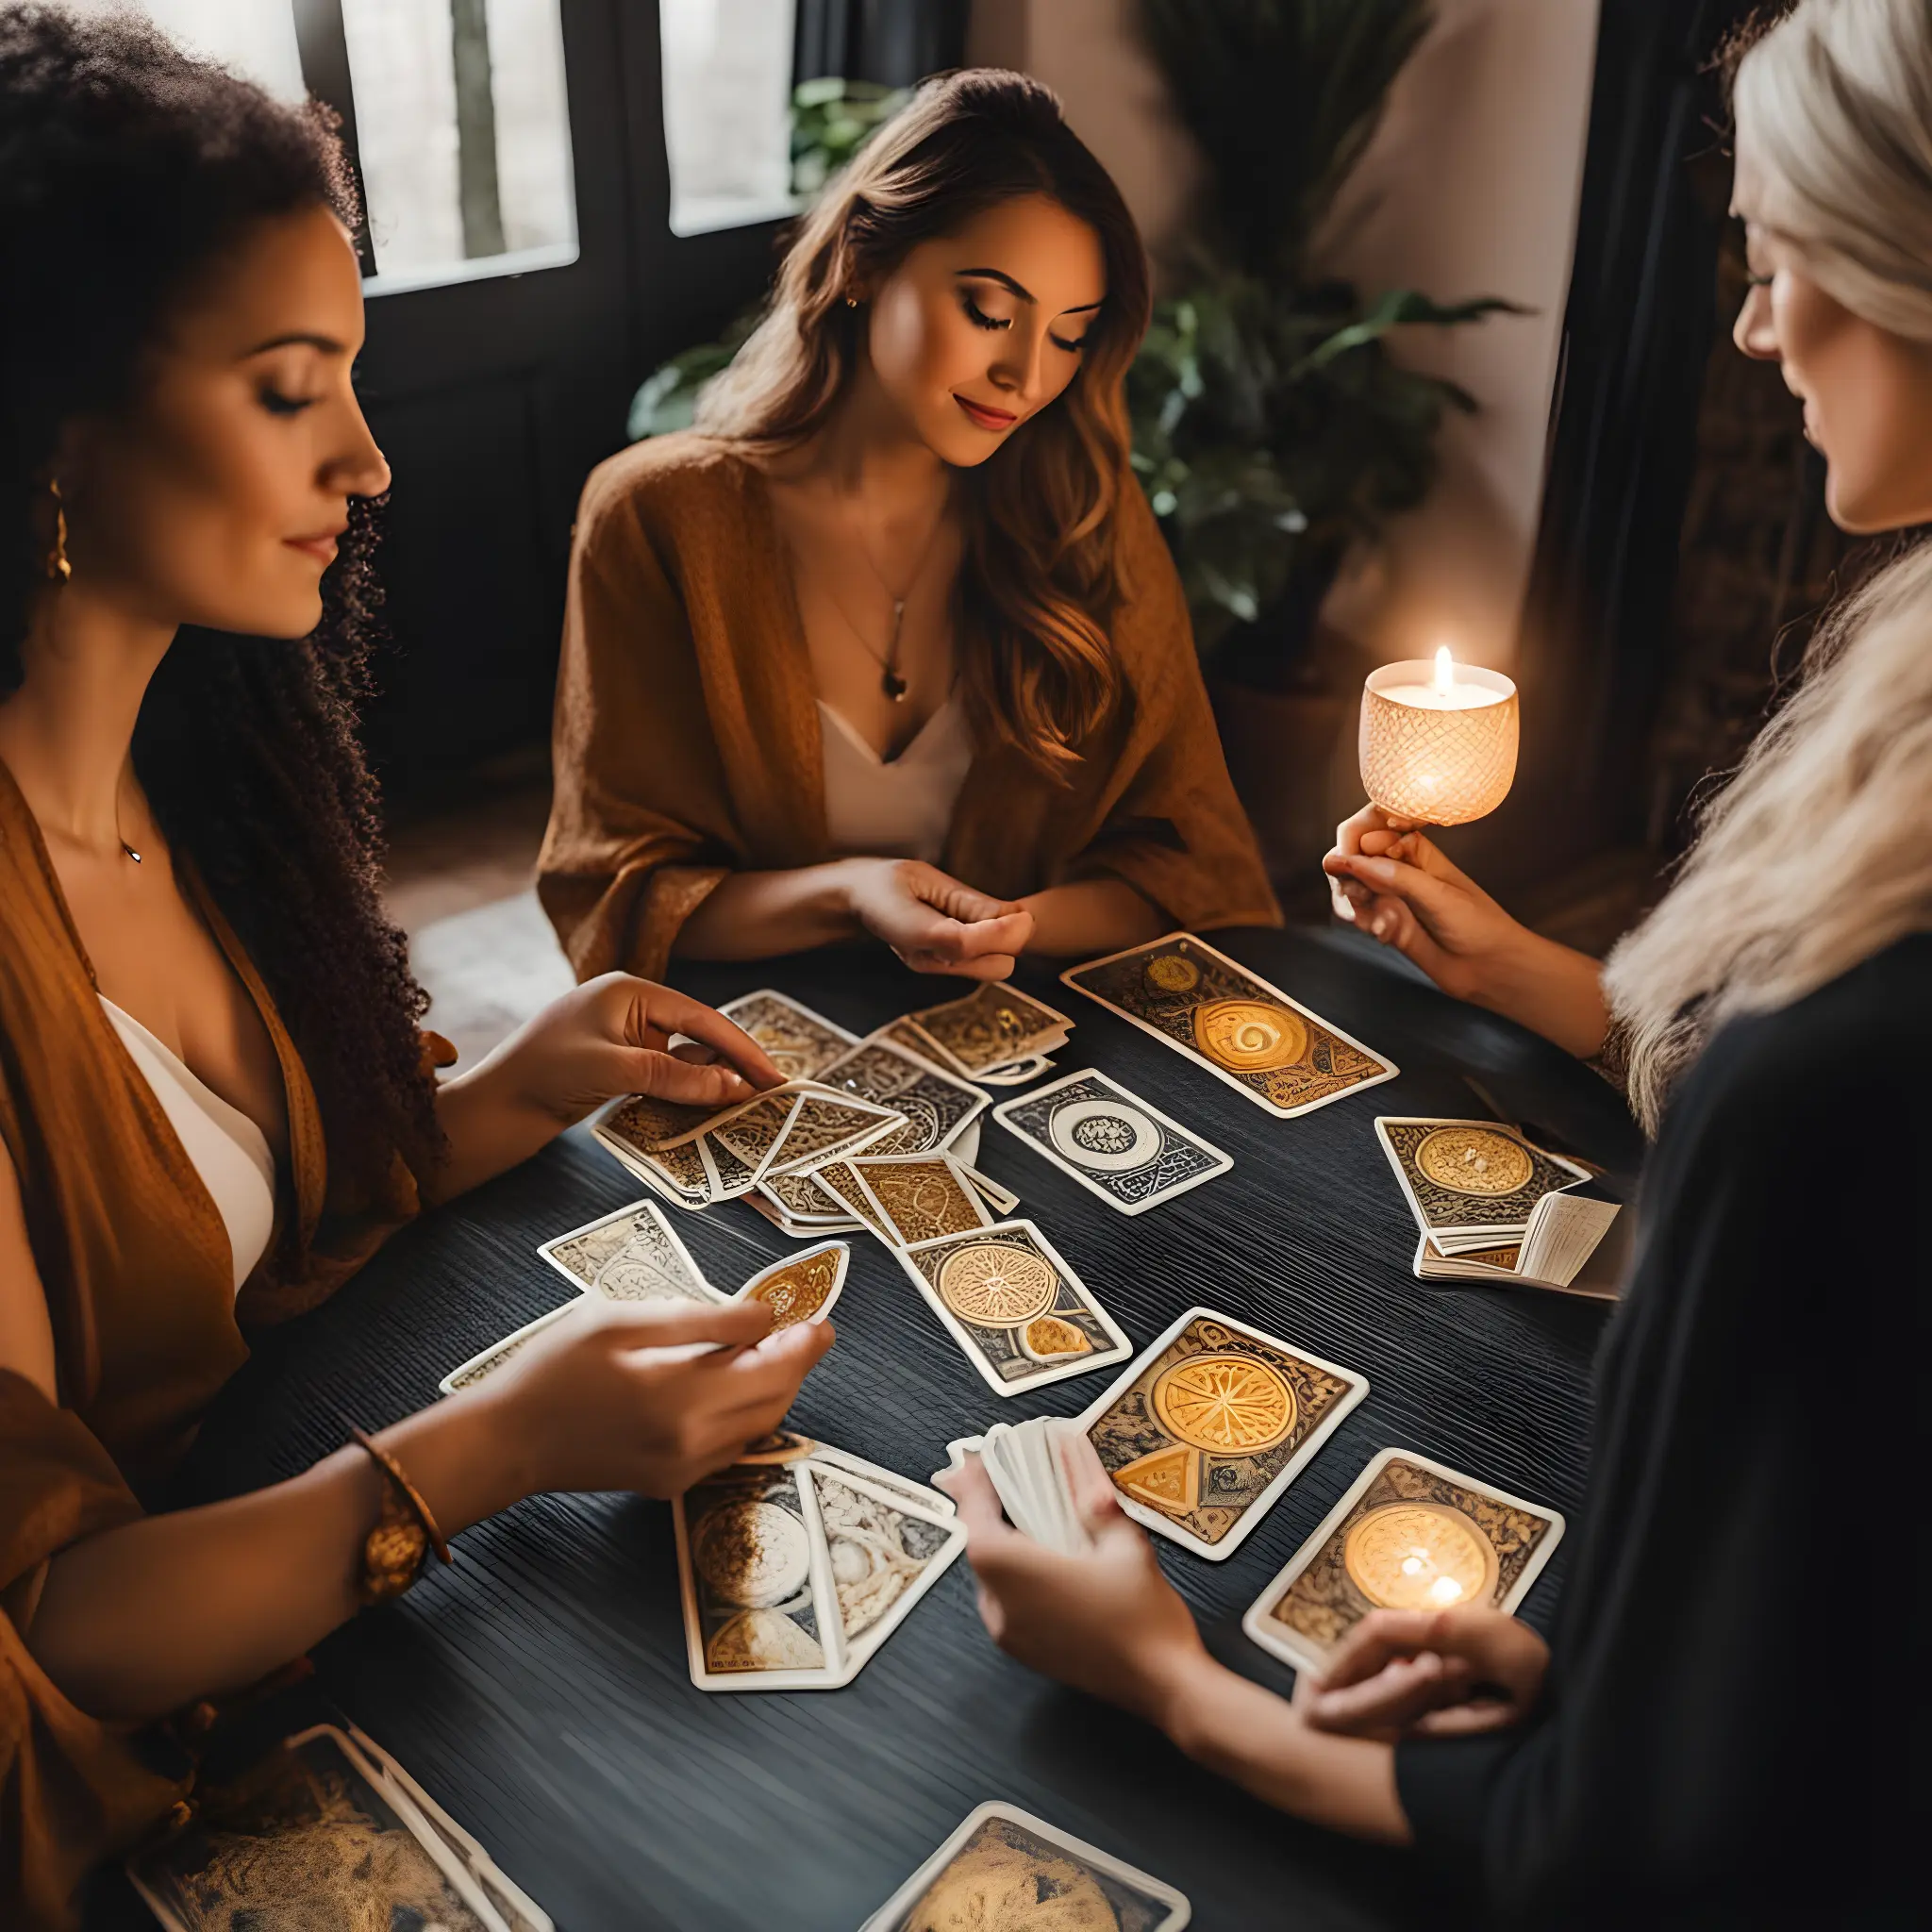 A group of women engrossed in a tarot card reading session.